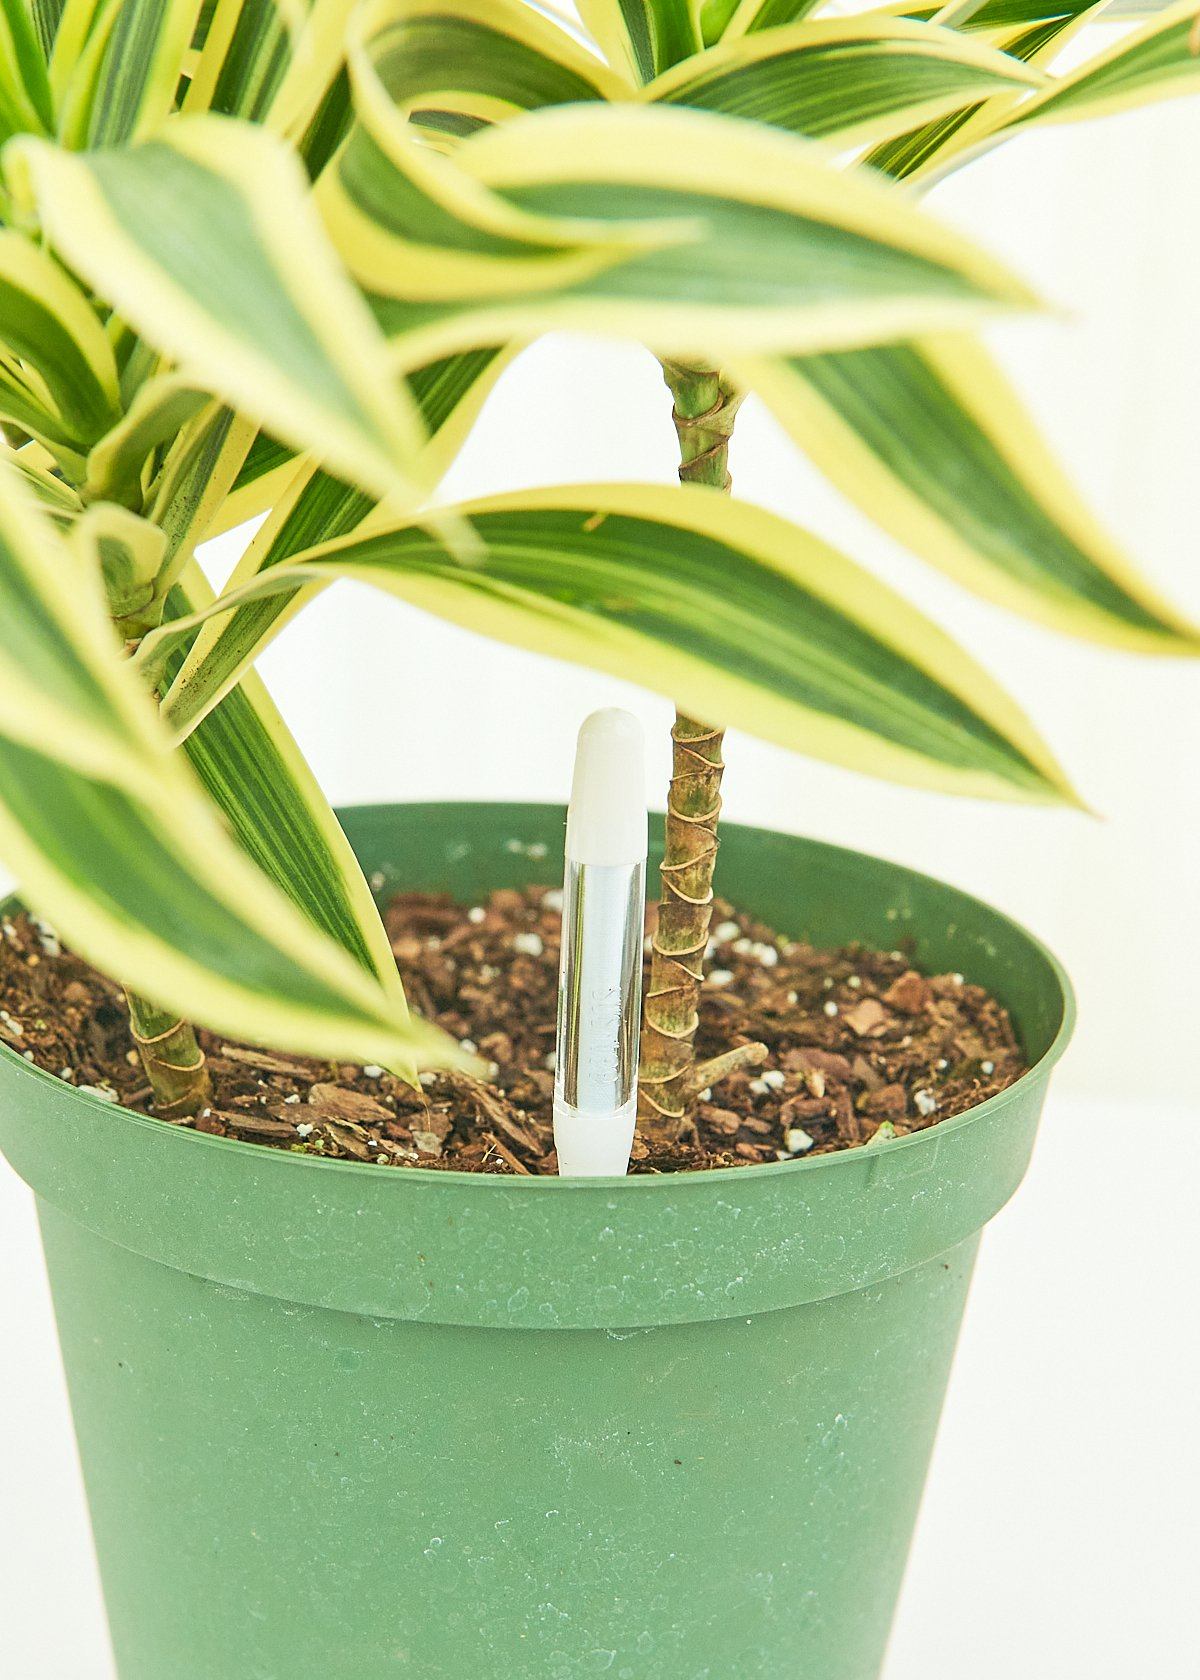 Medium Moisture Meter for plants with a fairly close shot of it in a pot with a plant